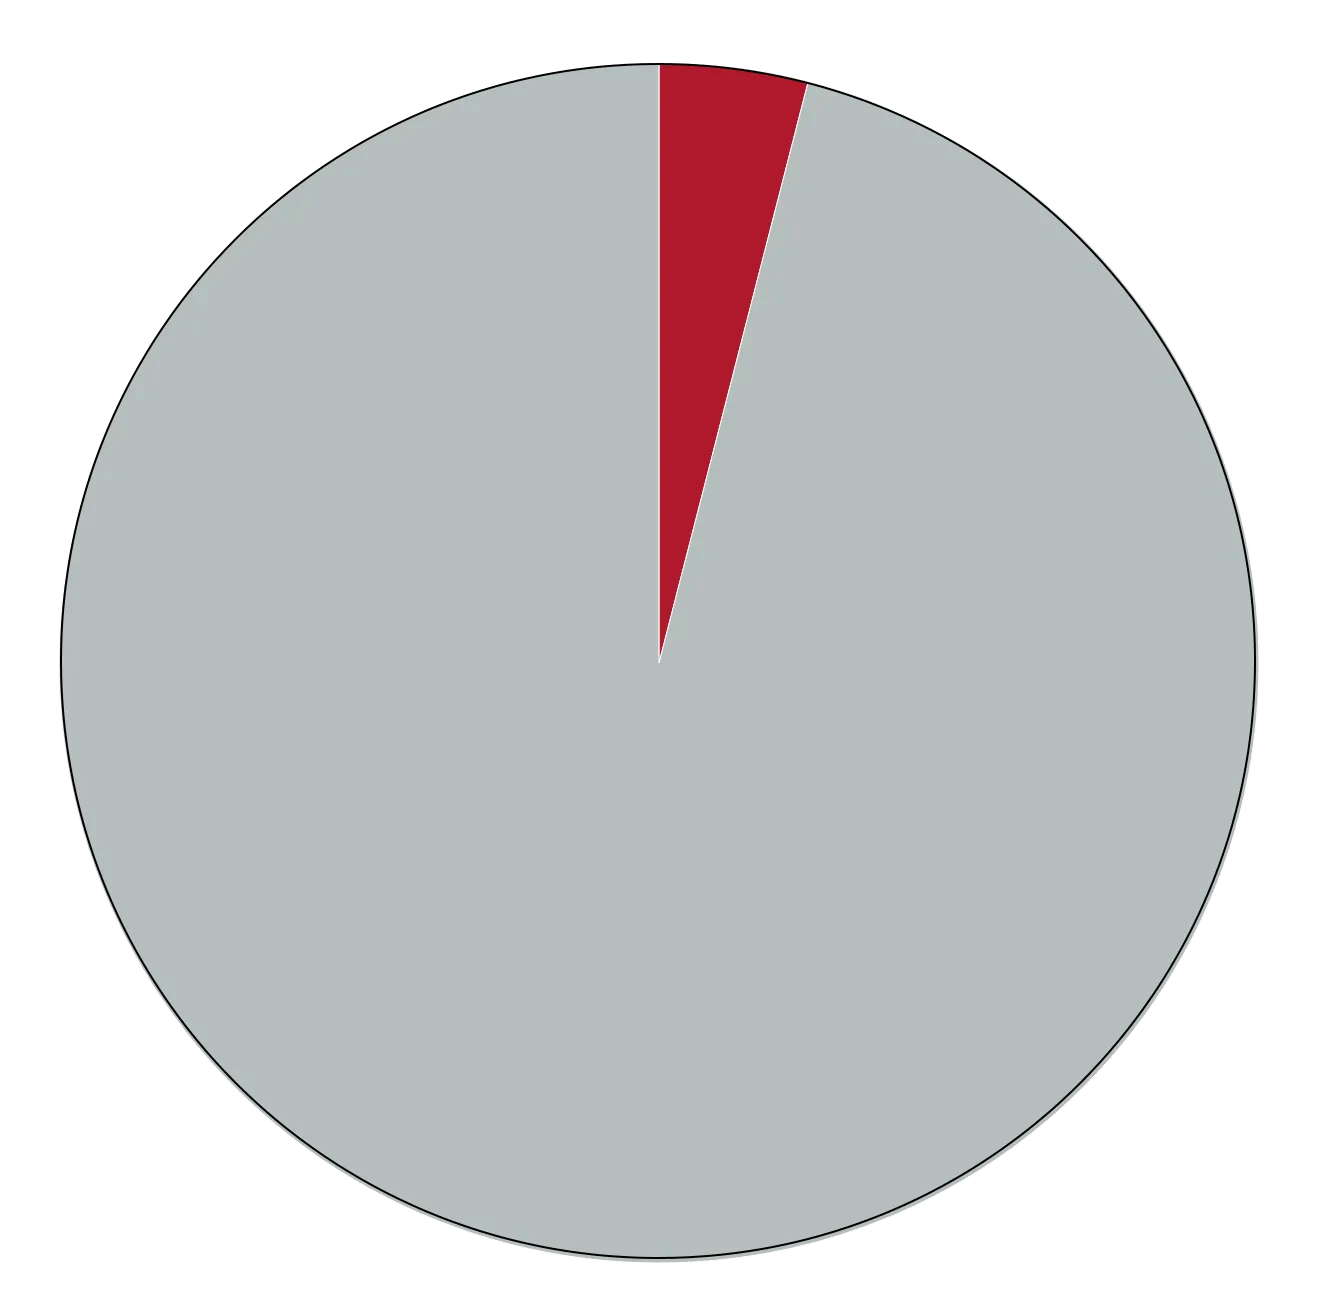 Pie chart showing percetage of world's surface experiencing record heat in the past 10 years.